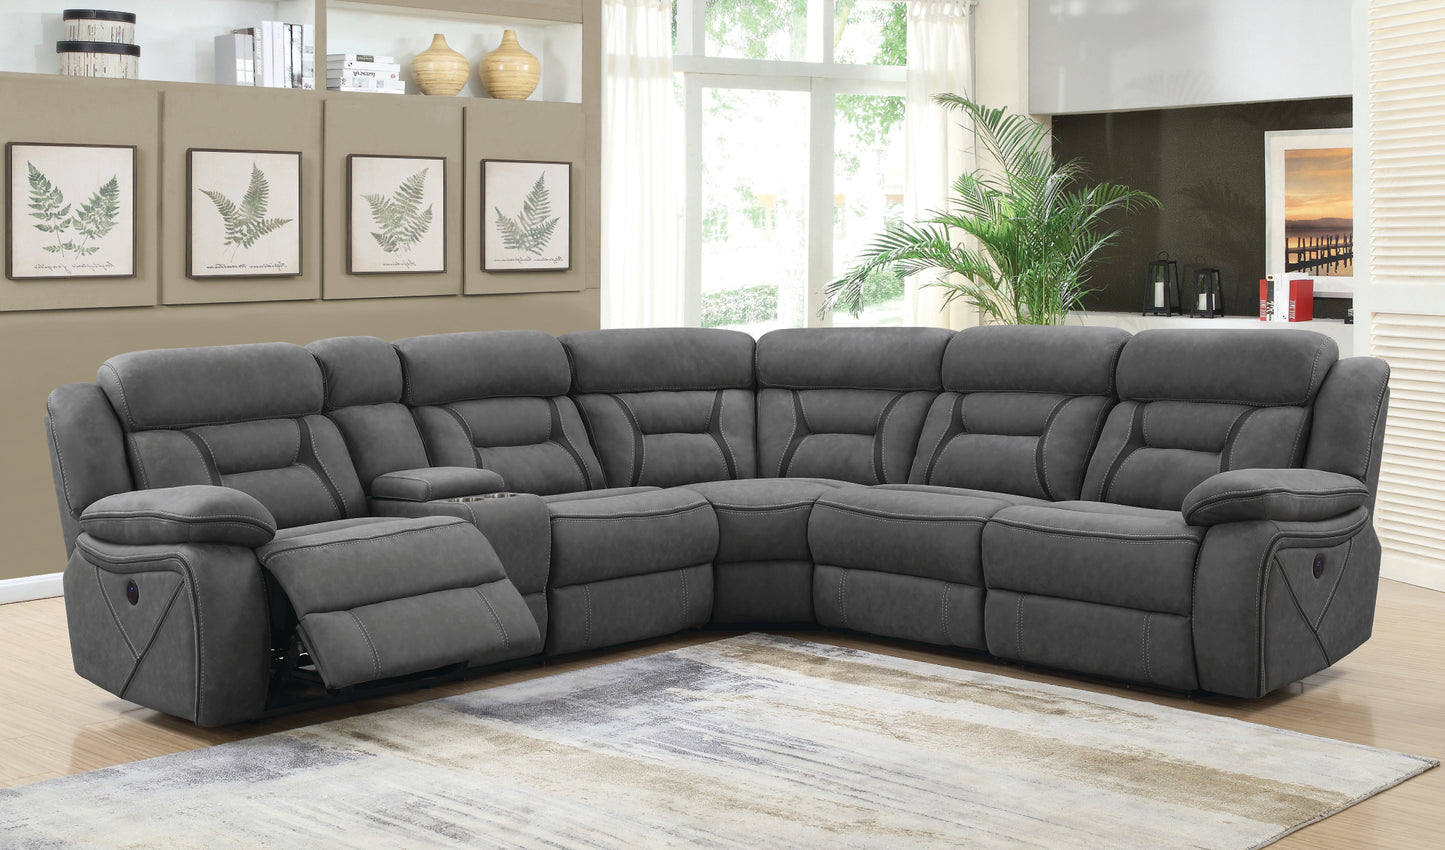 LS1149 - Reclining Sectional